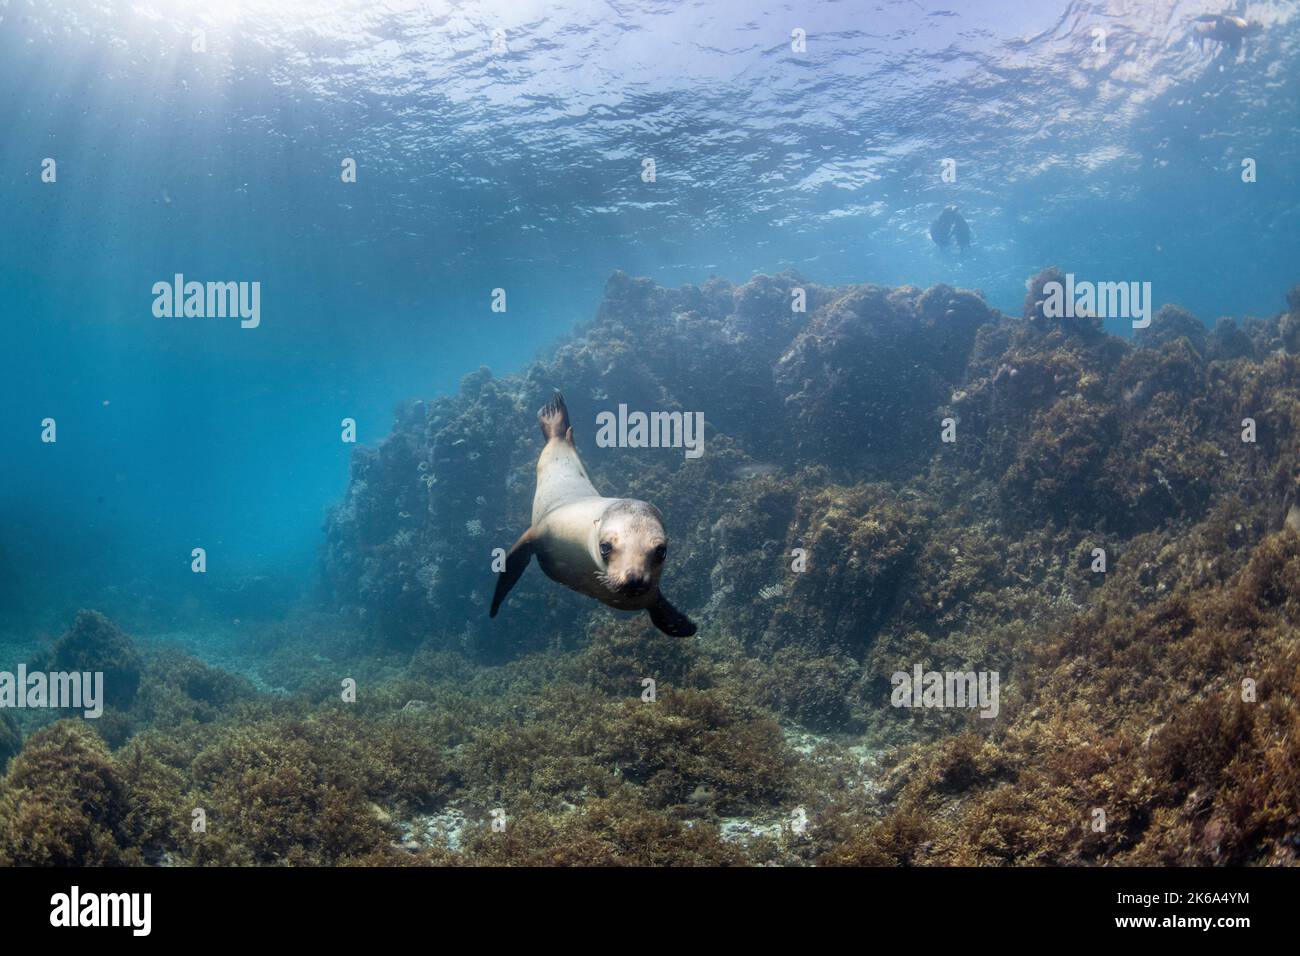 A California ea lion swims down to the ocean floor while others stay at the surface, Sea of Cortez. Stock Photo